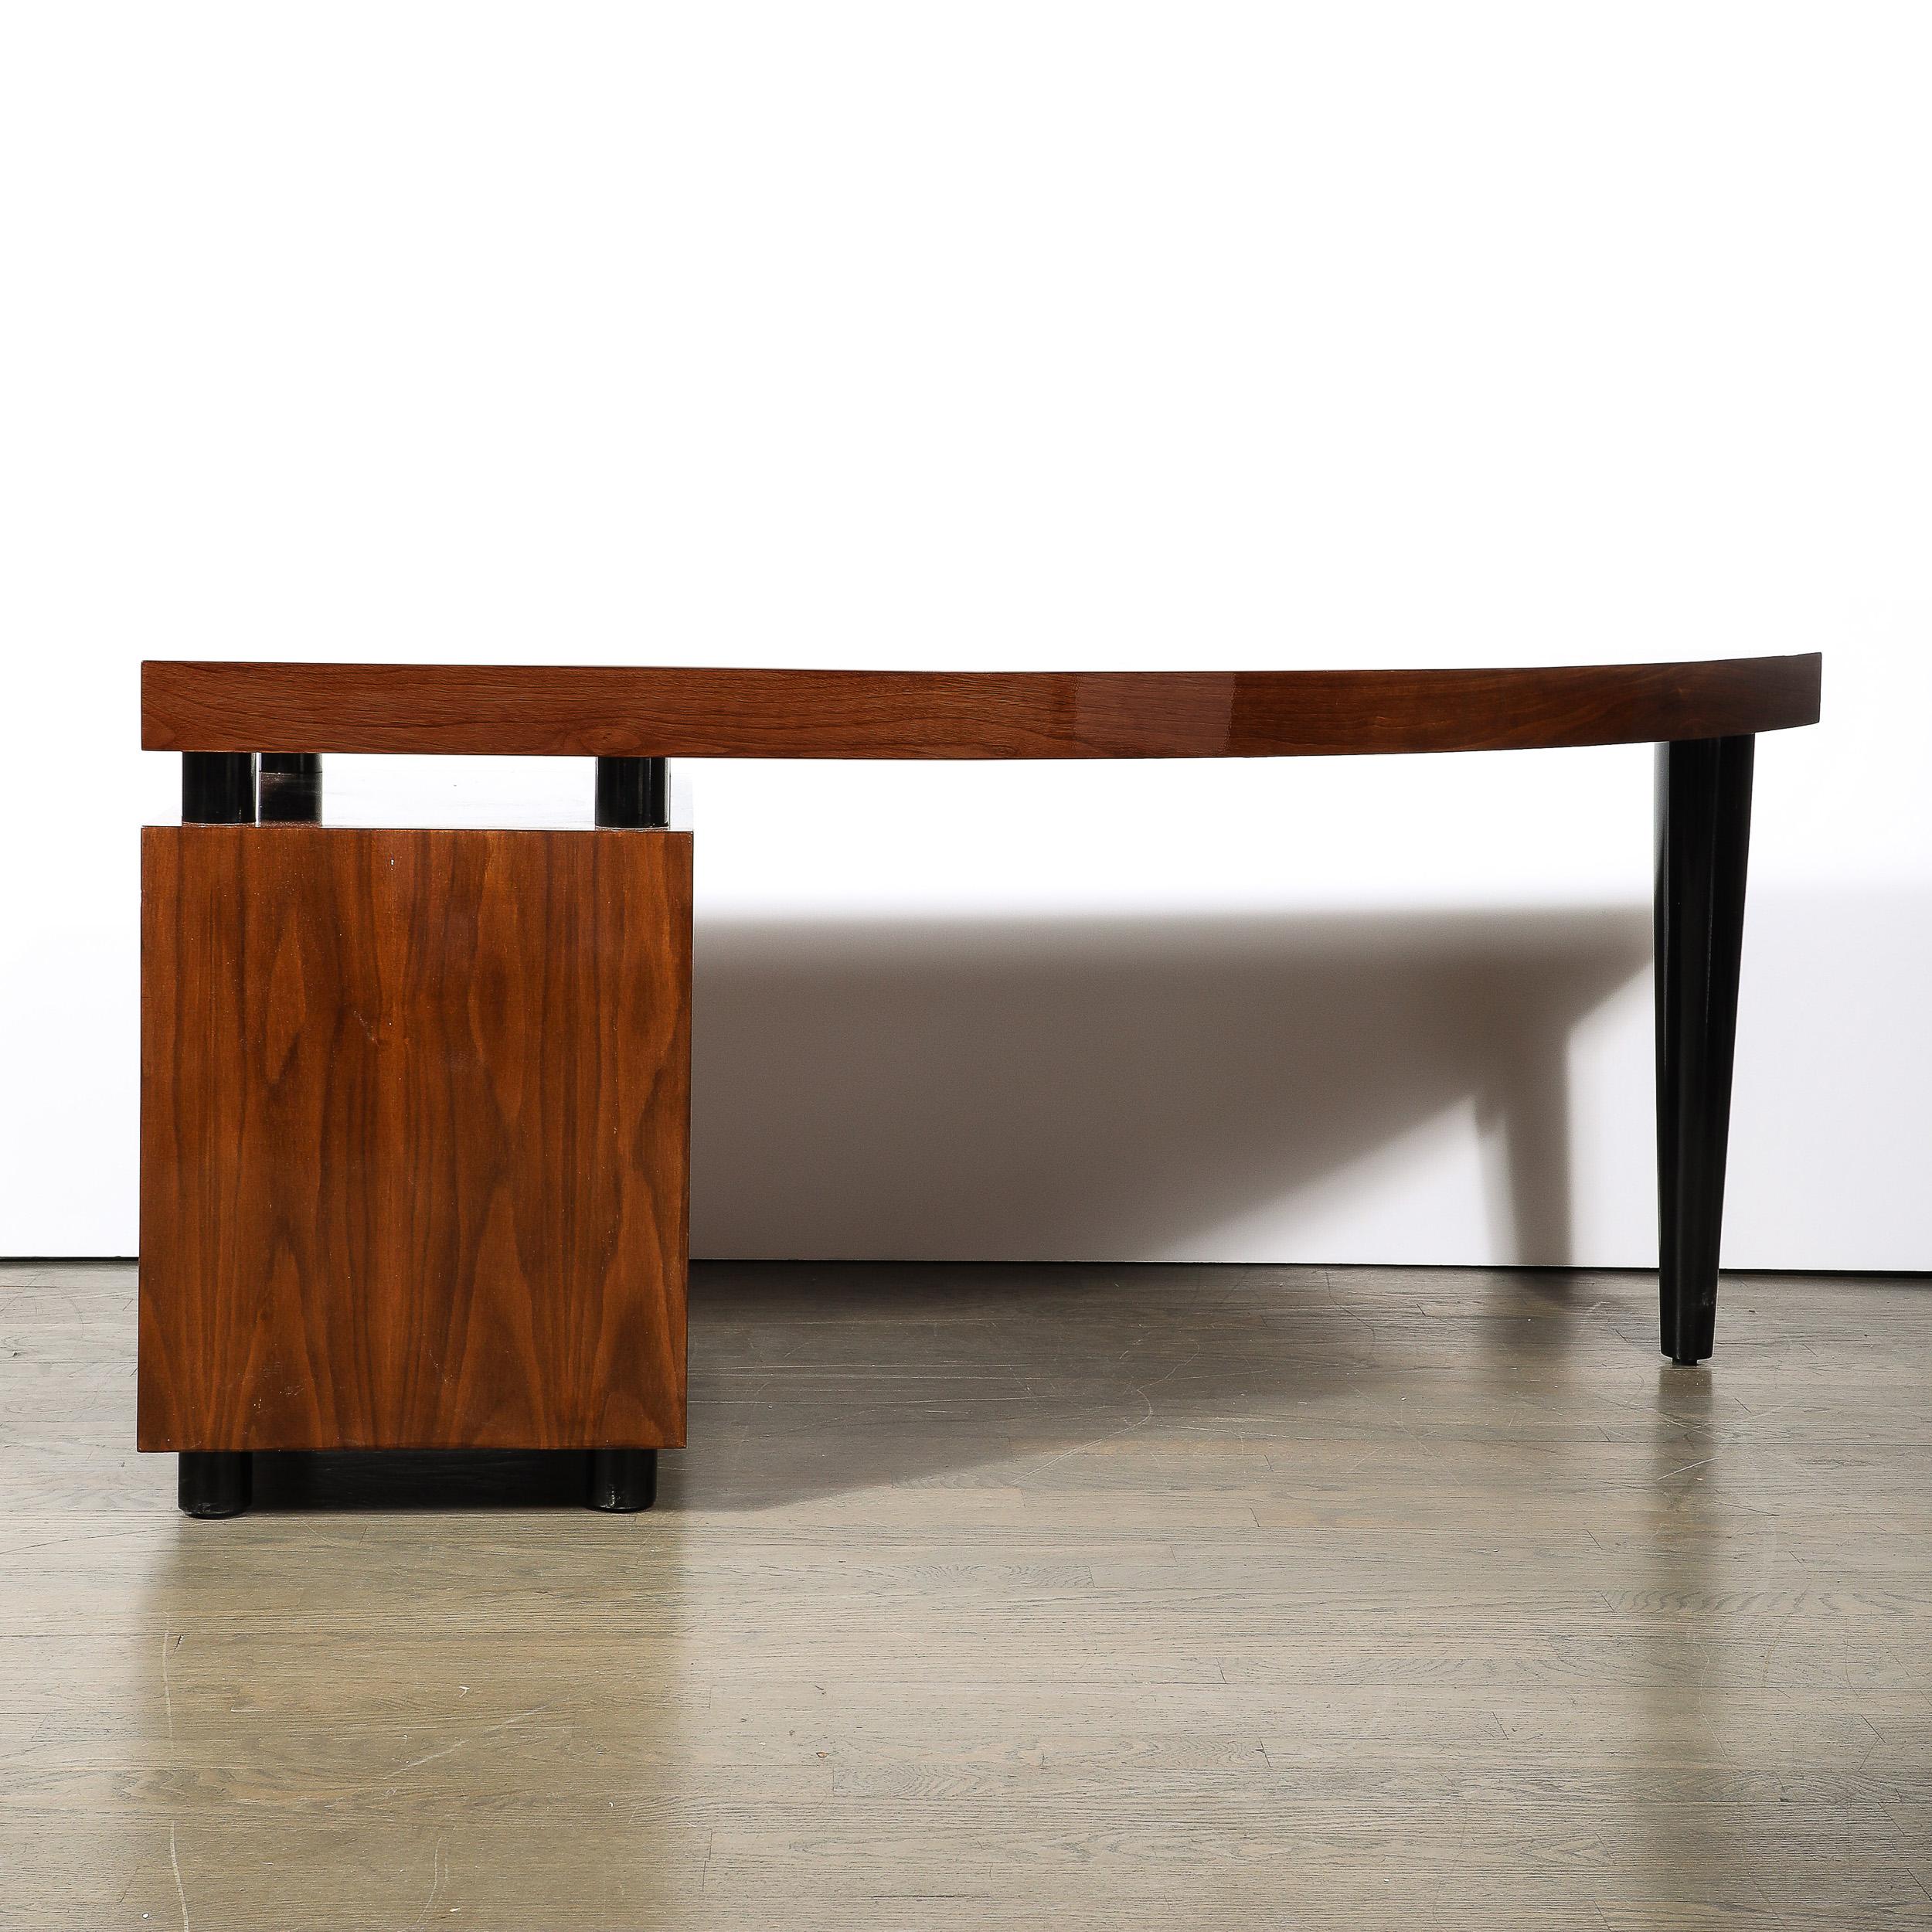 Late 20th Century Mid-Century Bookmatched Walnut W/ Tapered Leg Boca Desk by Leon Rosen for Pace For Sale